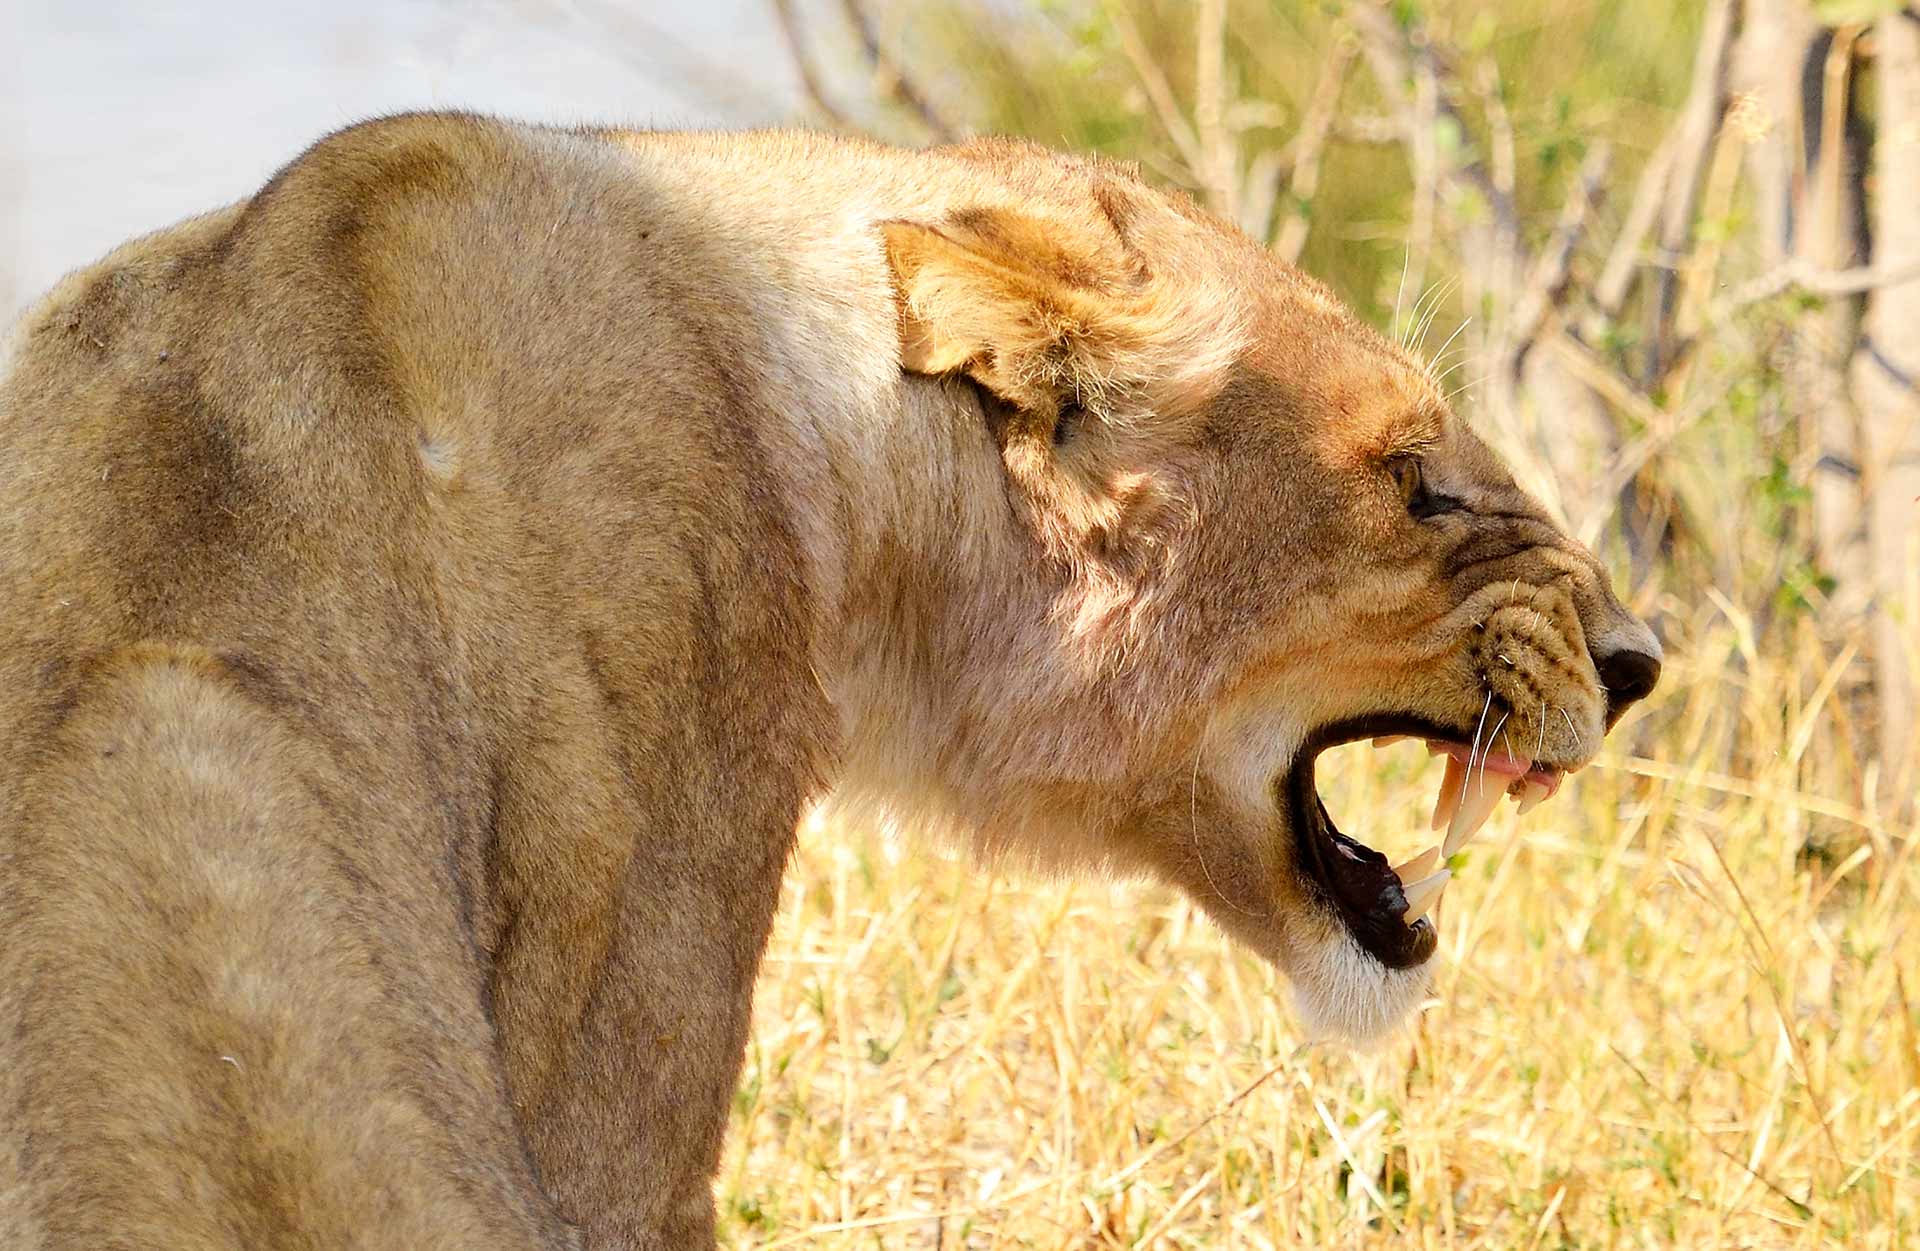 Adult Lioness snarling with teeth showing